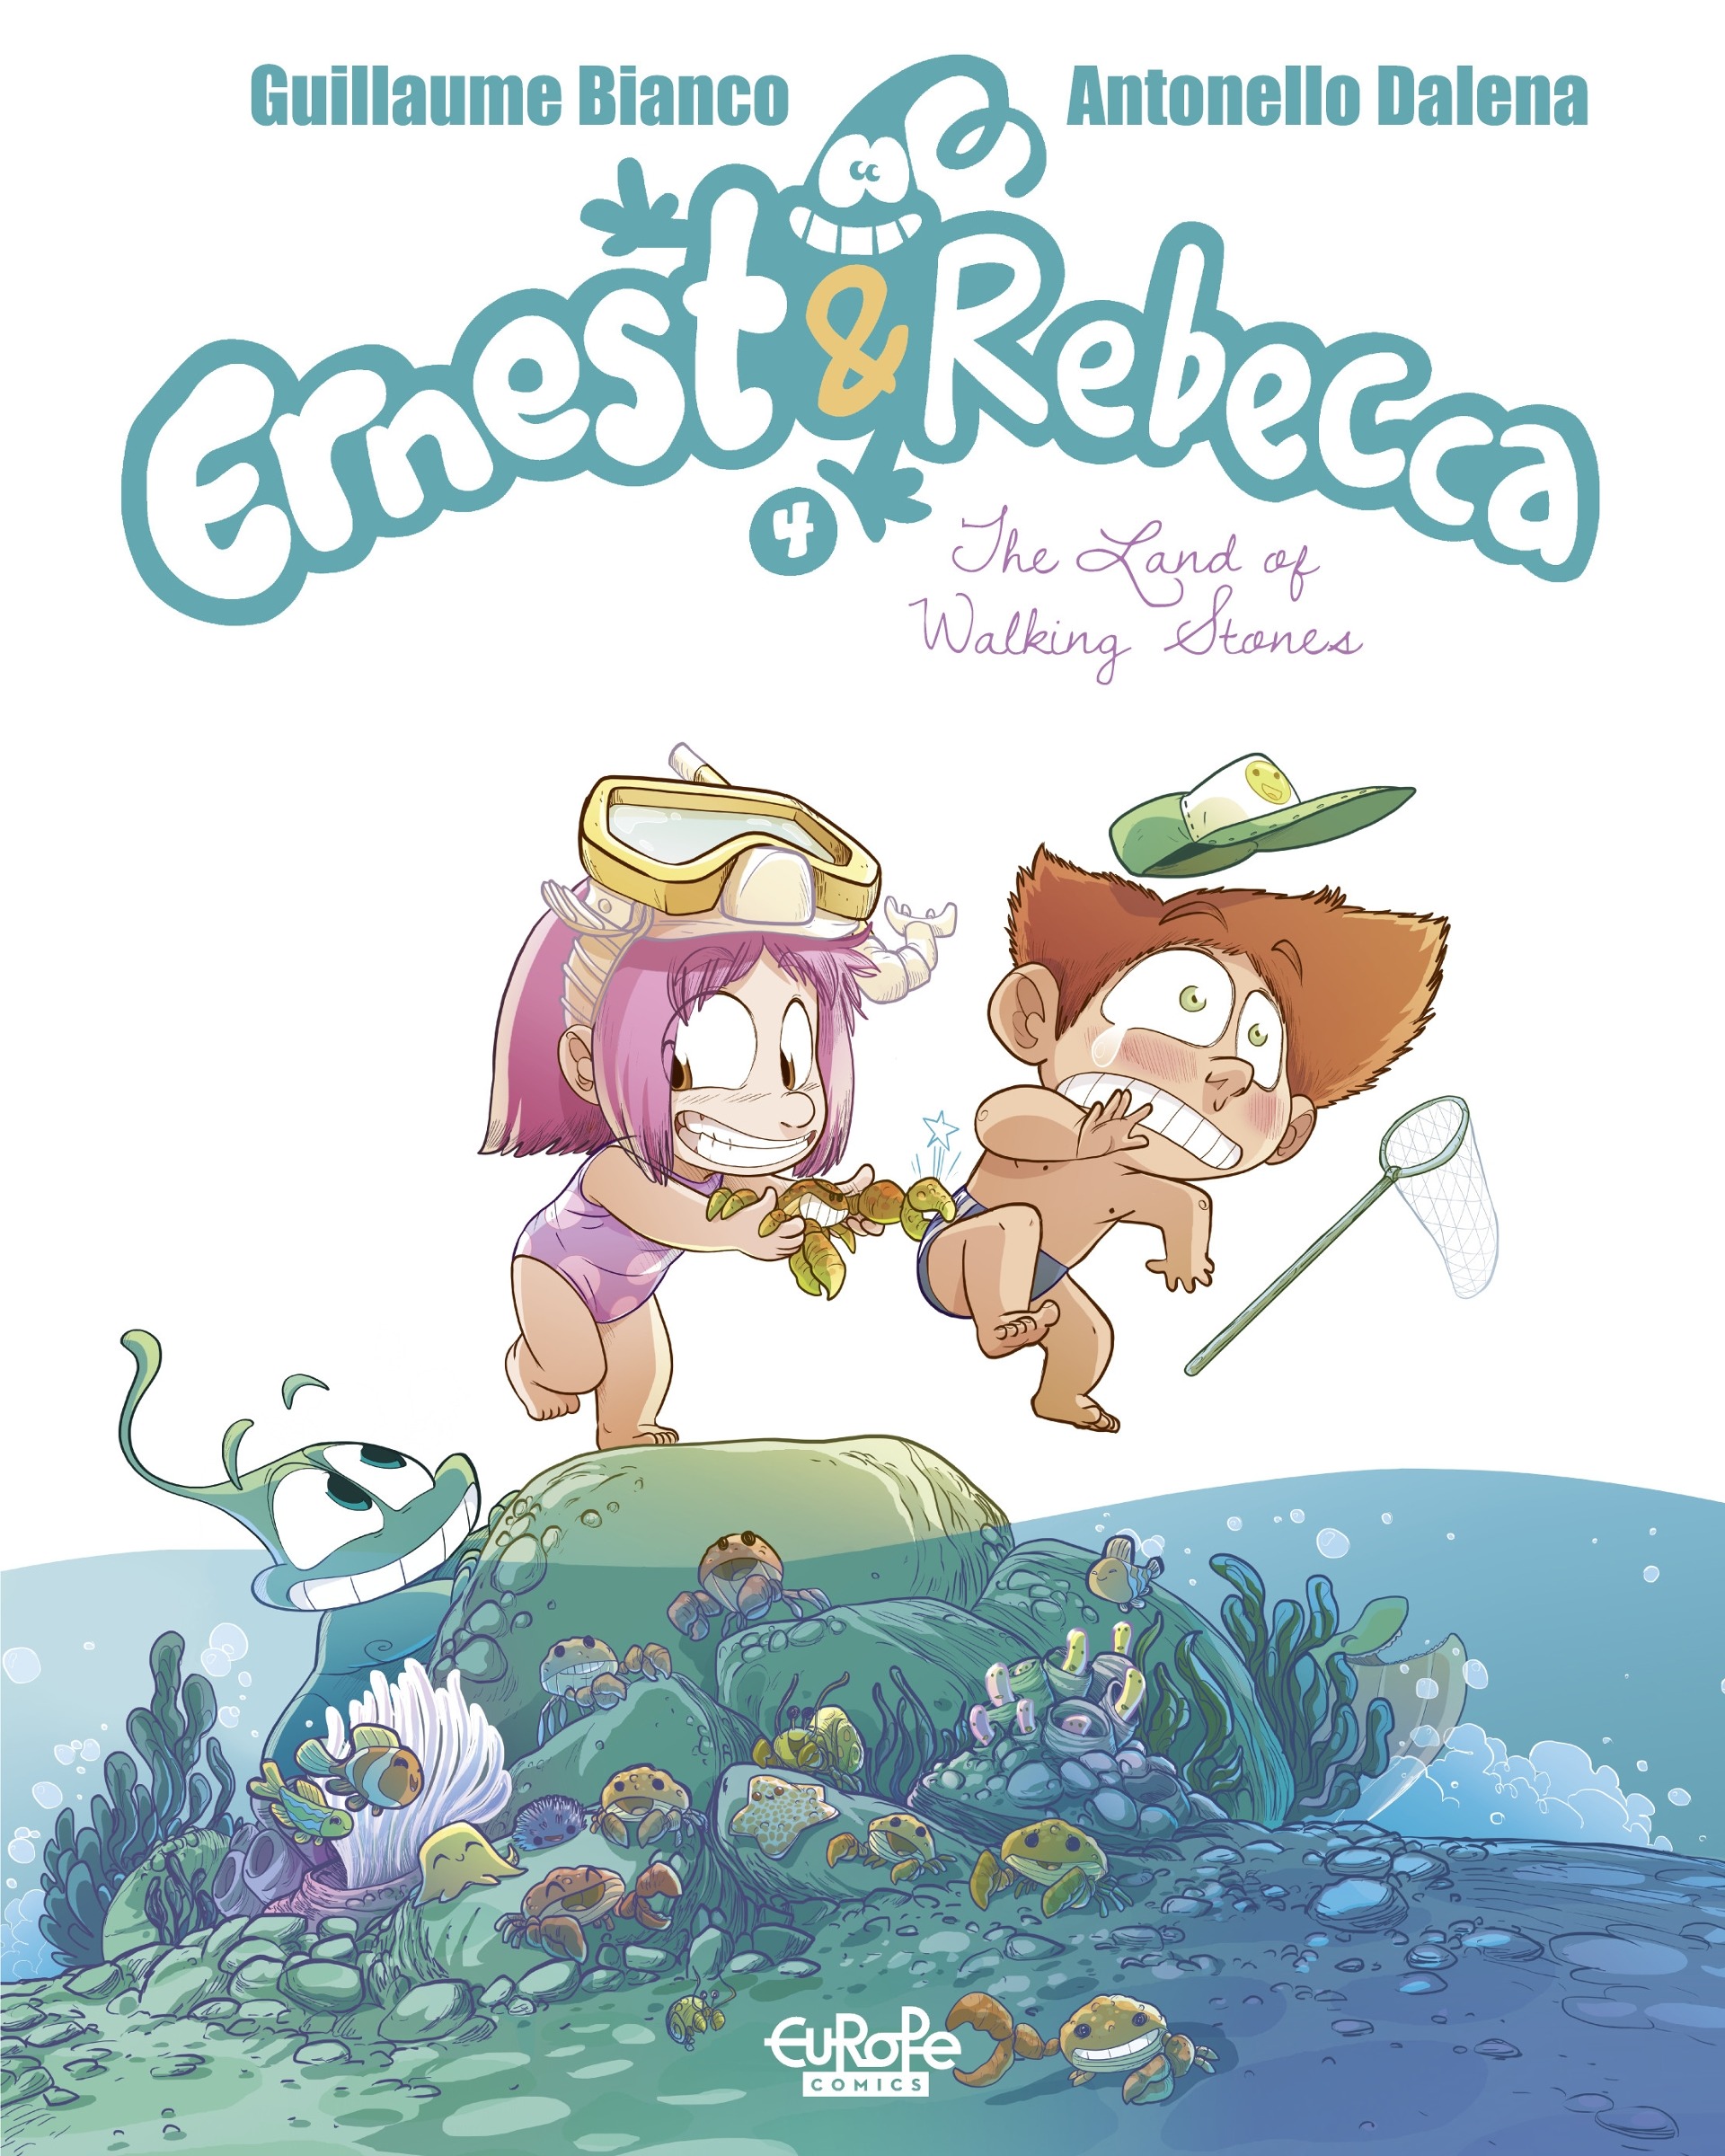 Read online Ernest & Rebecca comic -  Issue #4 - 1